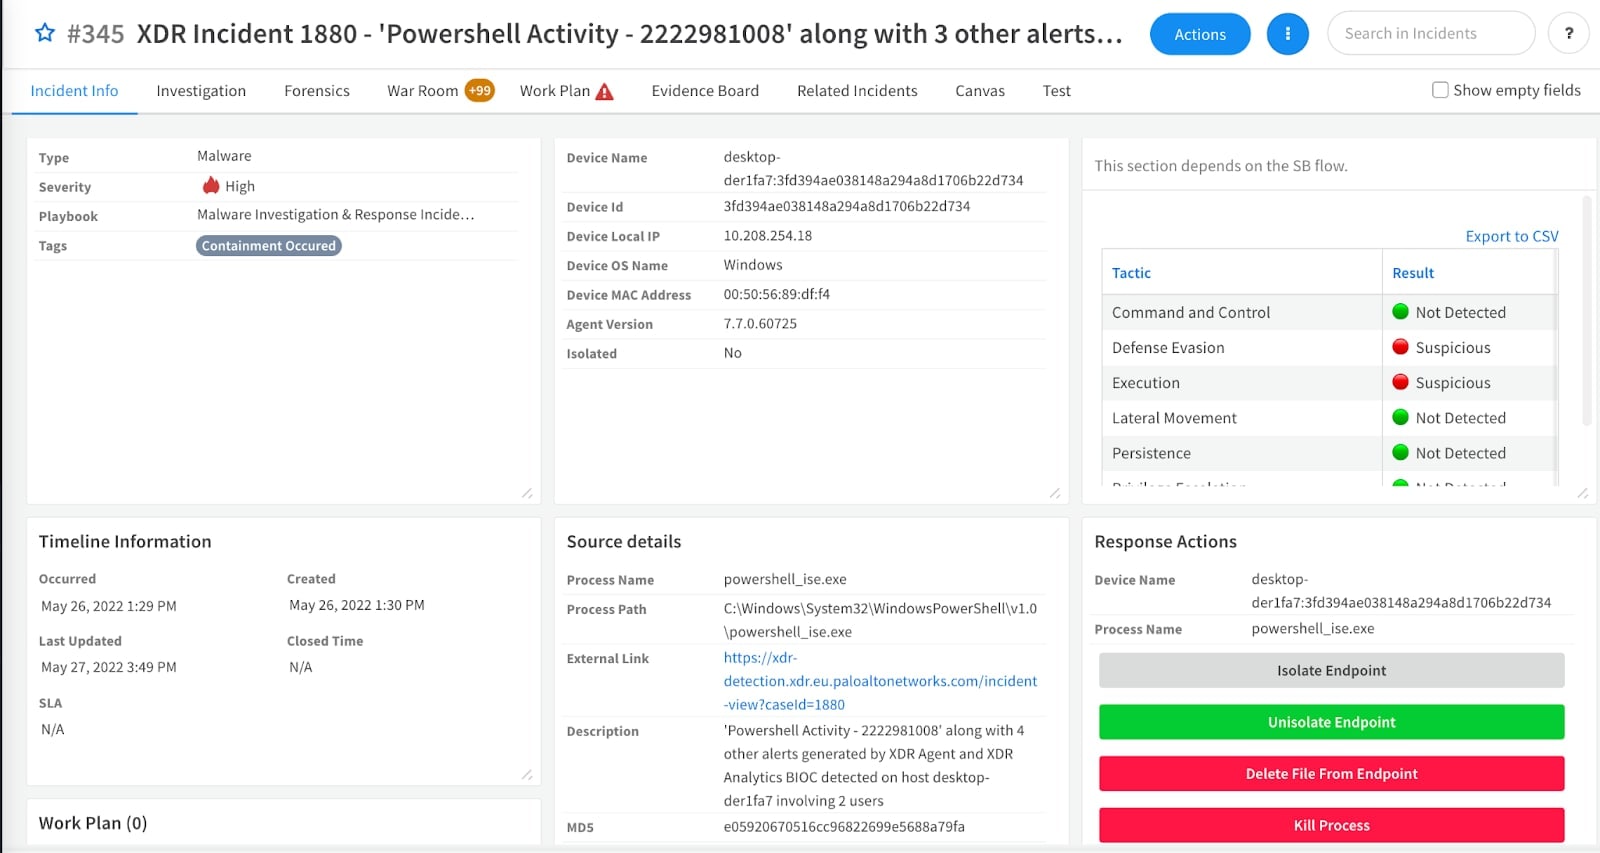 XDR Incident 1880 - 'Powershell Activity - 2222981008' along with 3 other alerts...